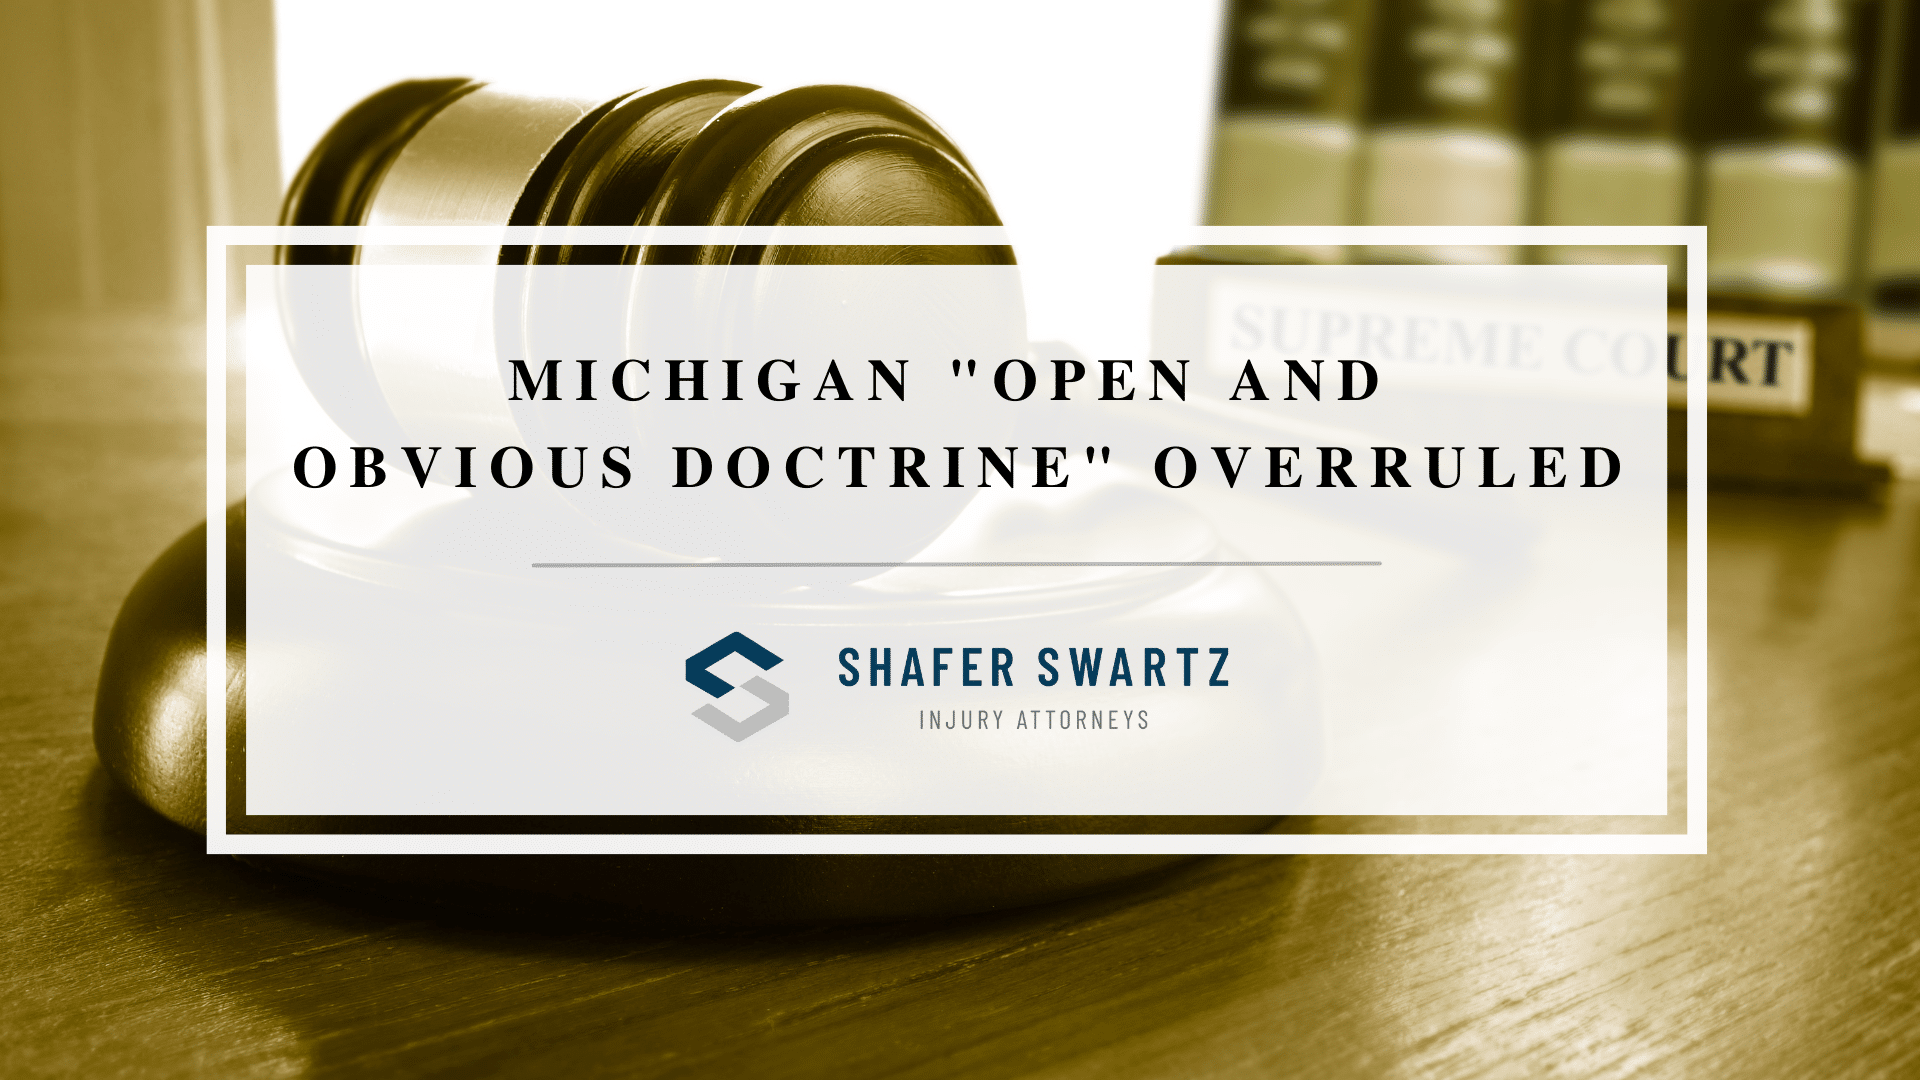 Featured image of michigan "open and obvious doctrine" overruled